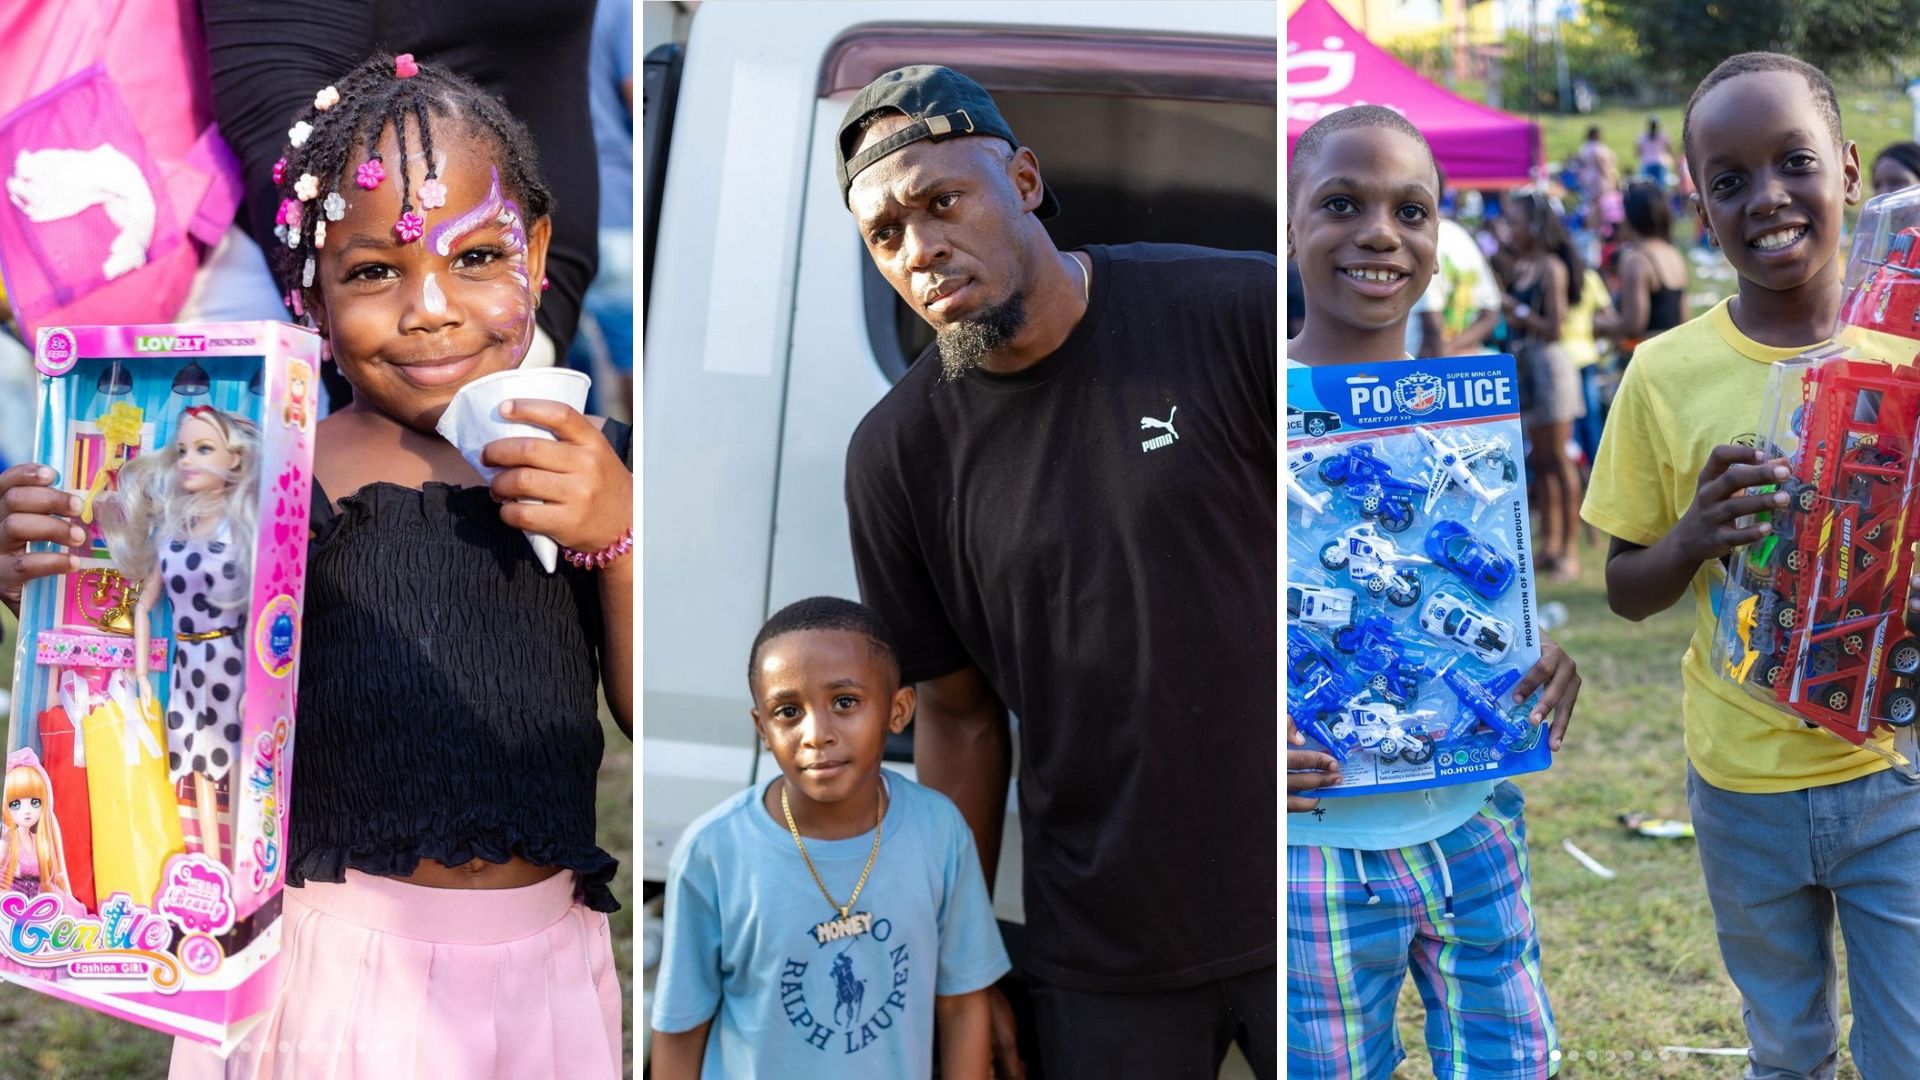 Usain Bolt's Annual Treat for Christmas Puts a Smile On Many Faces - Watch Video, See Photos